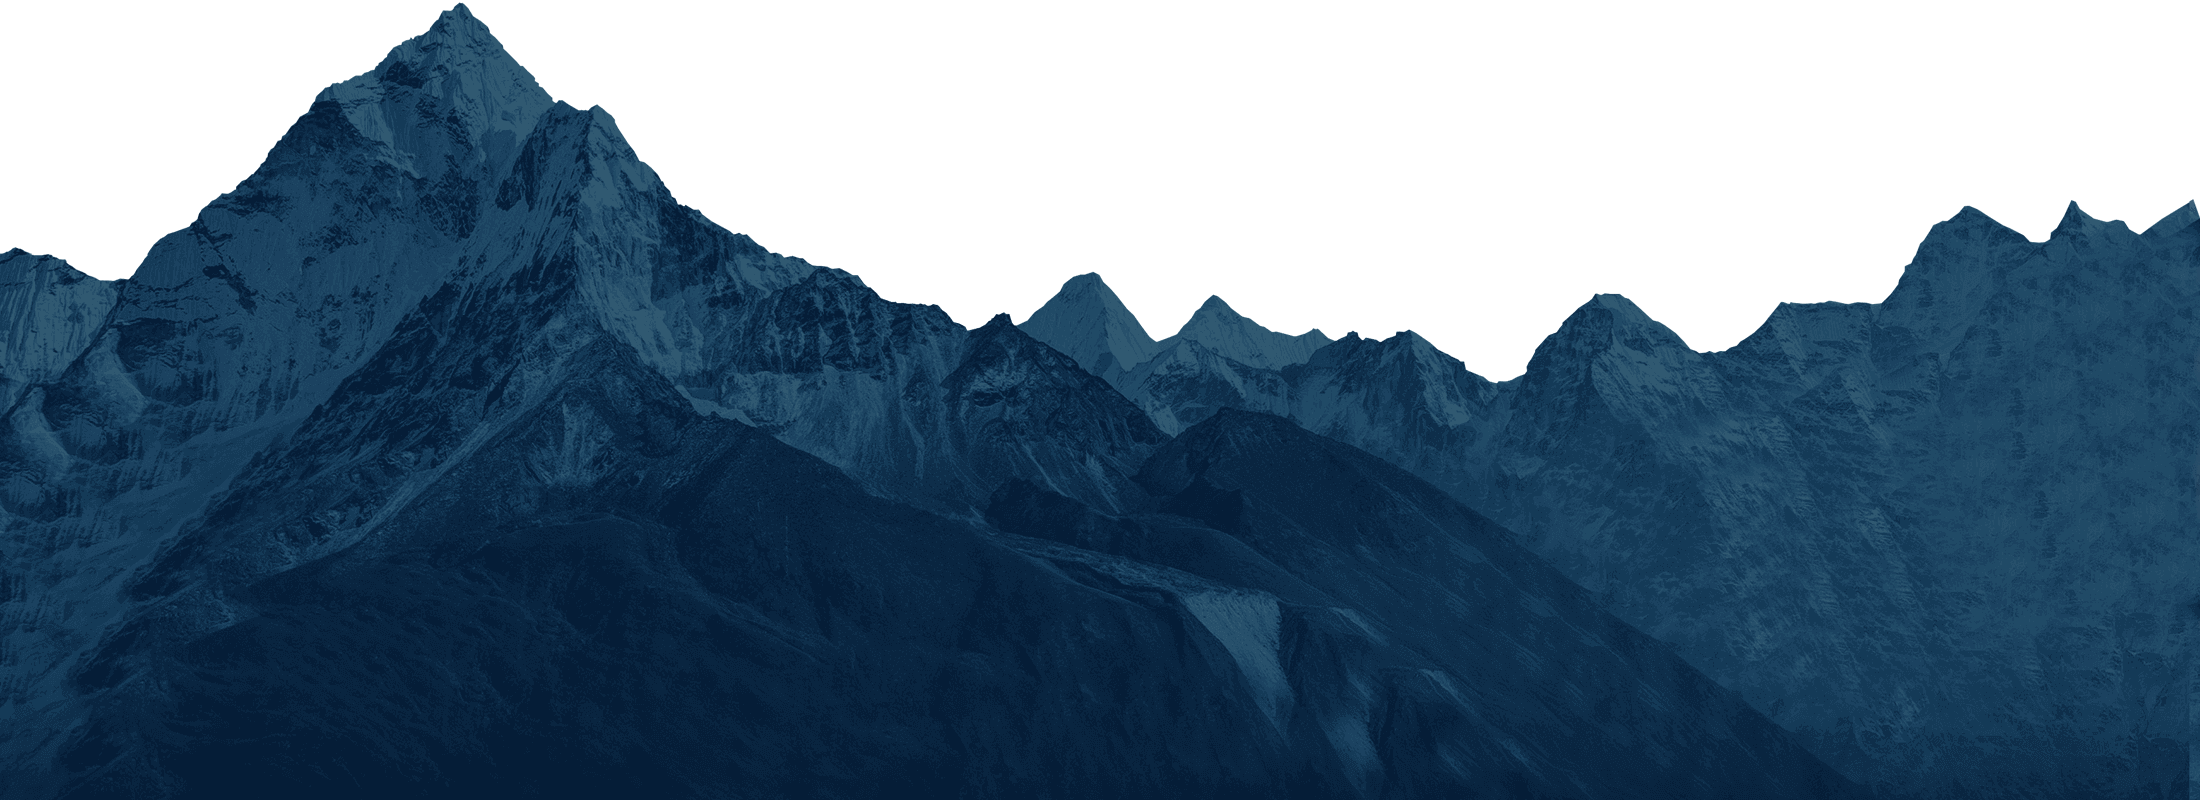 mountain, mountains, pattern png background download